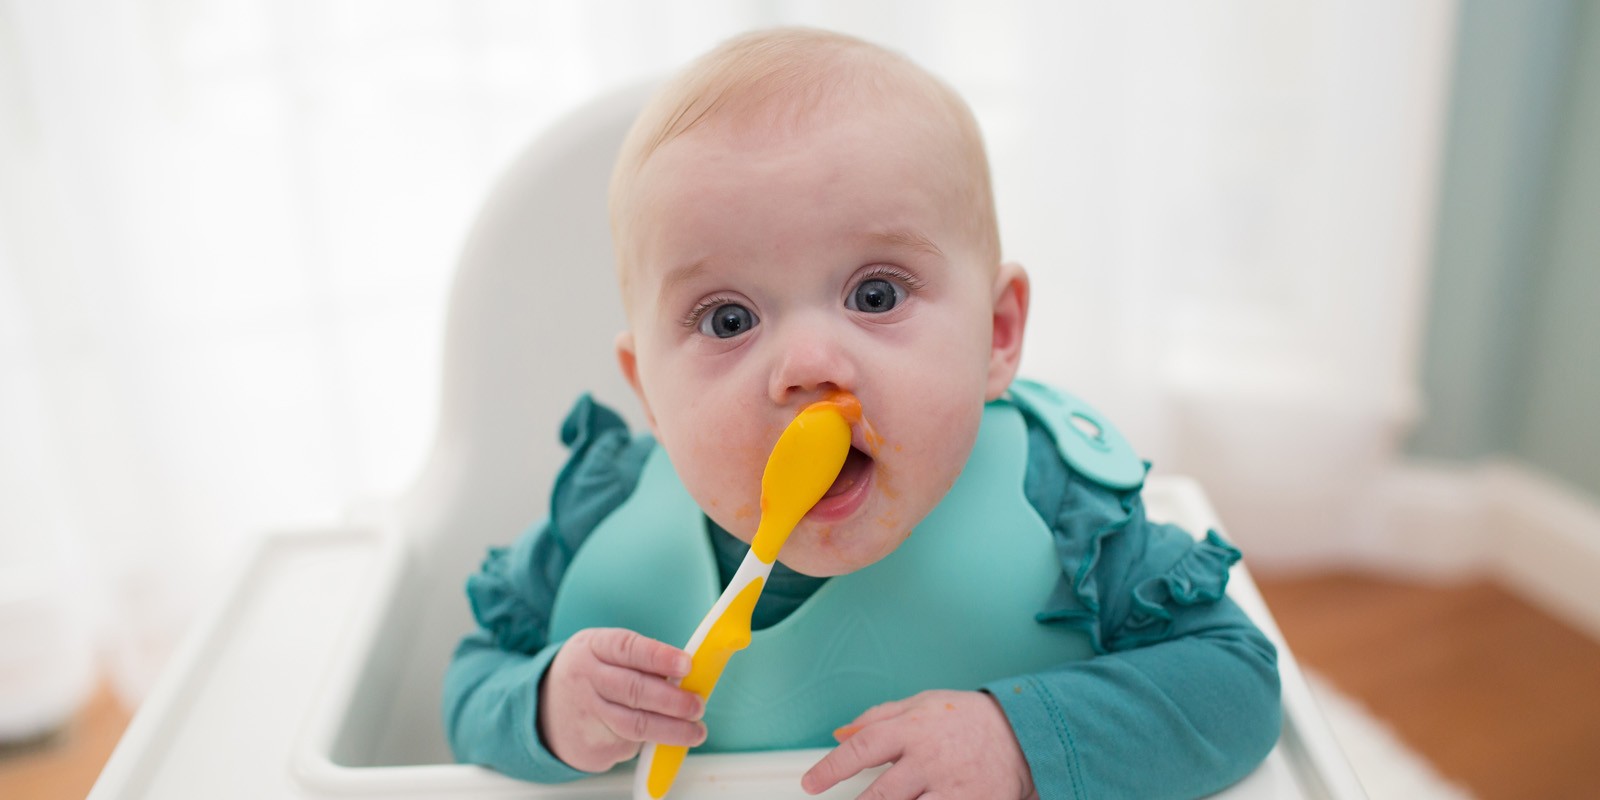 6 month old baby holding spoon eating